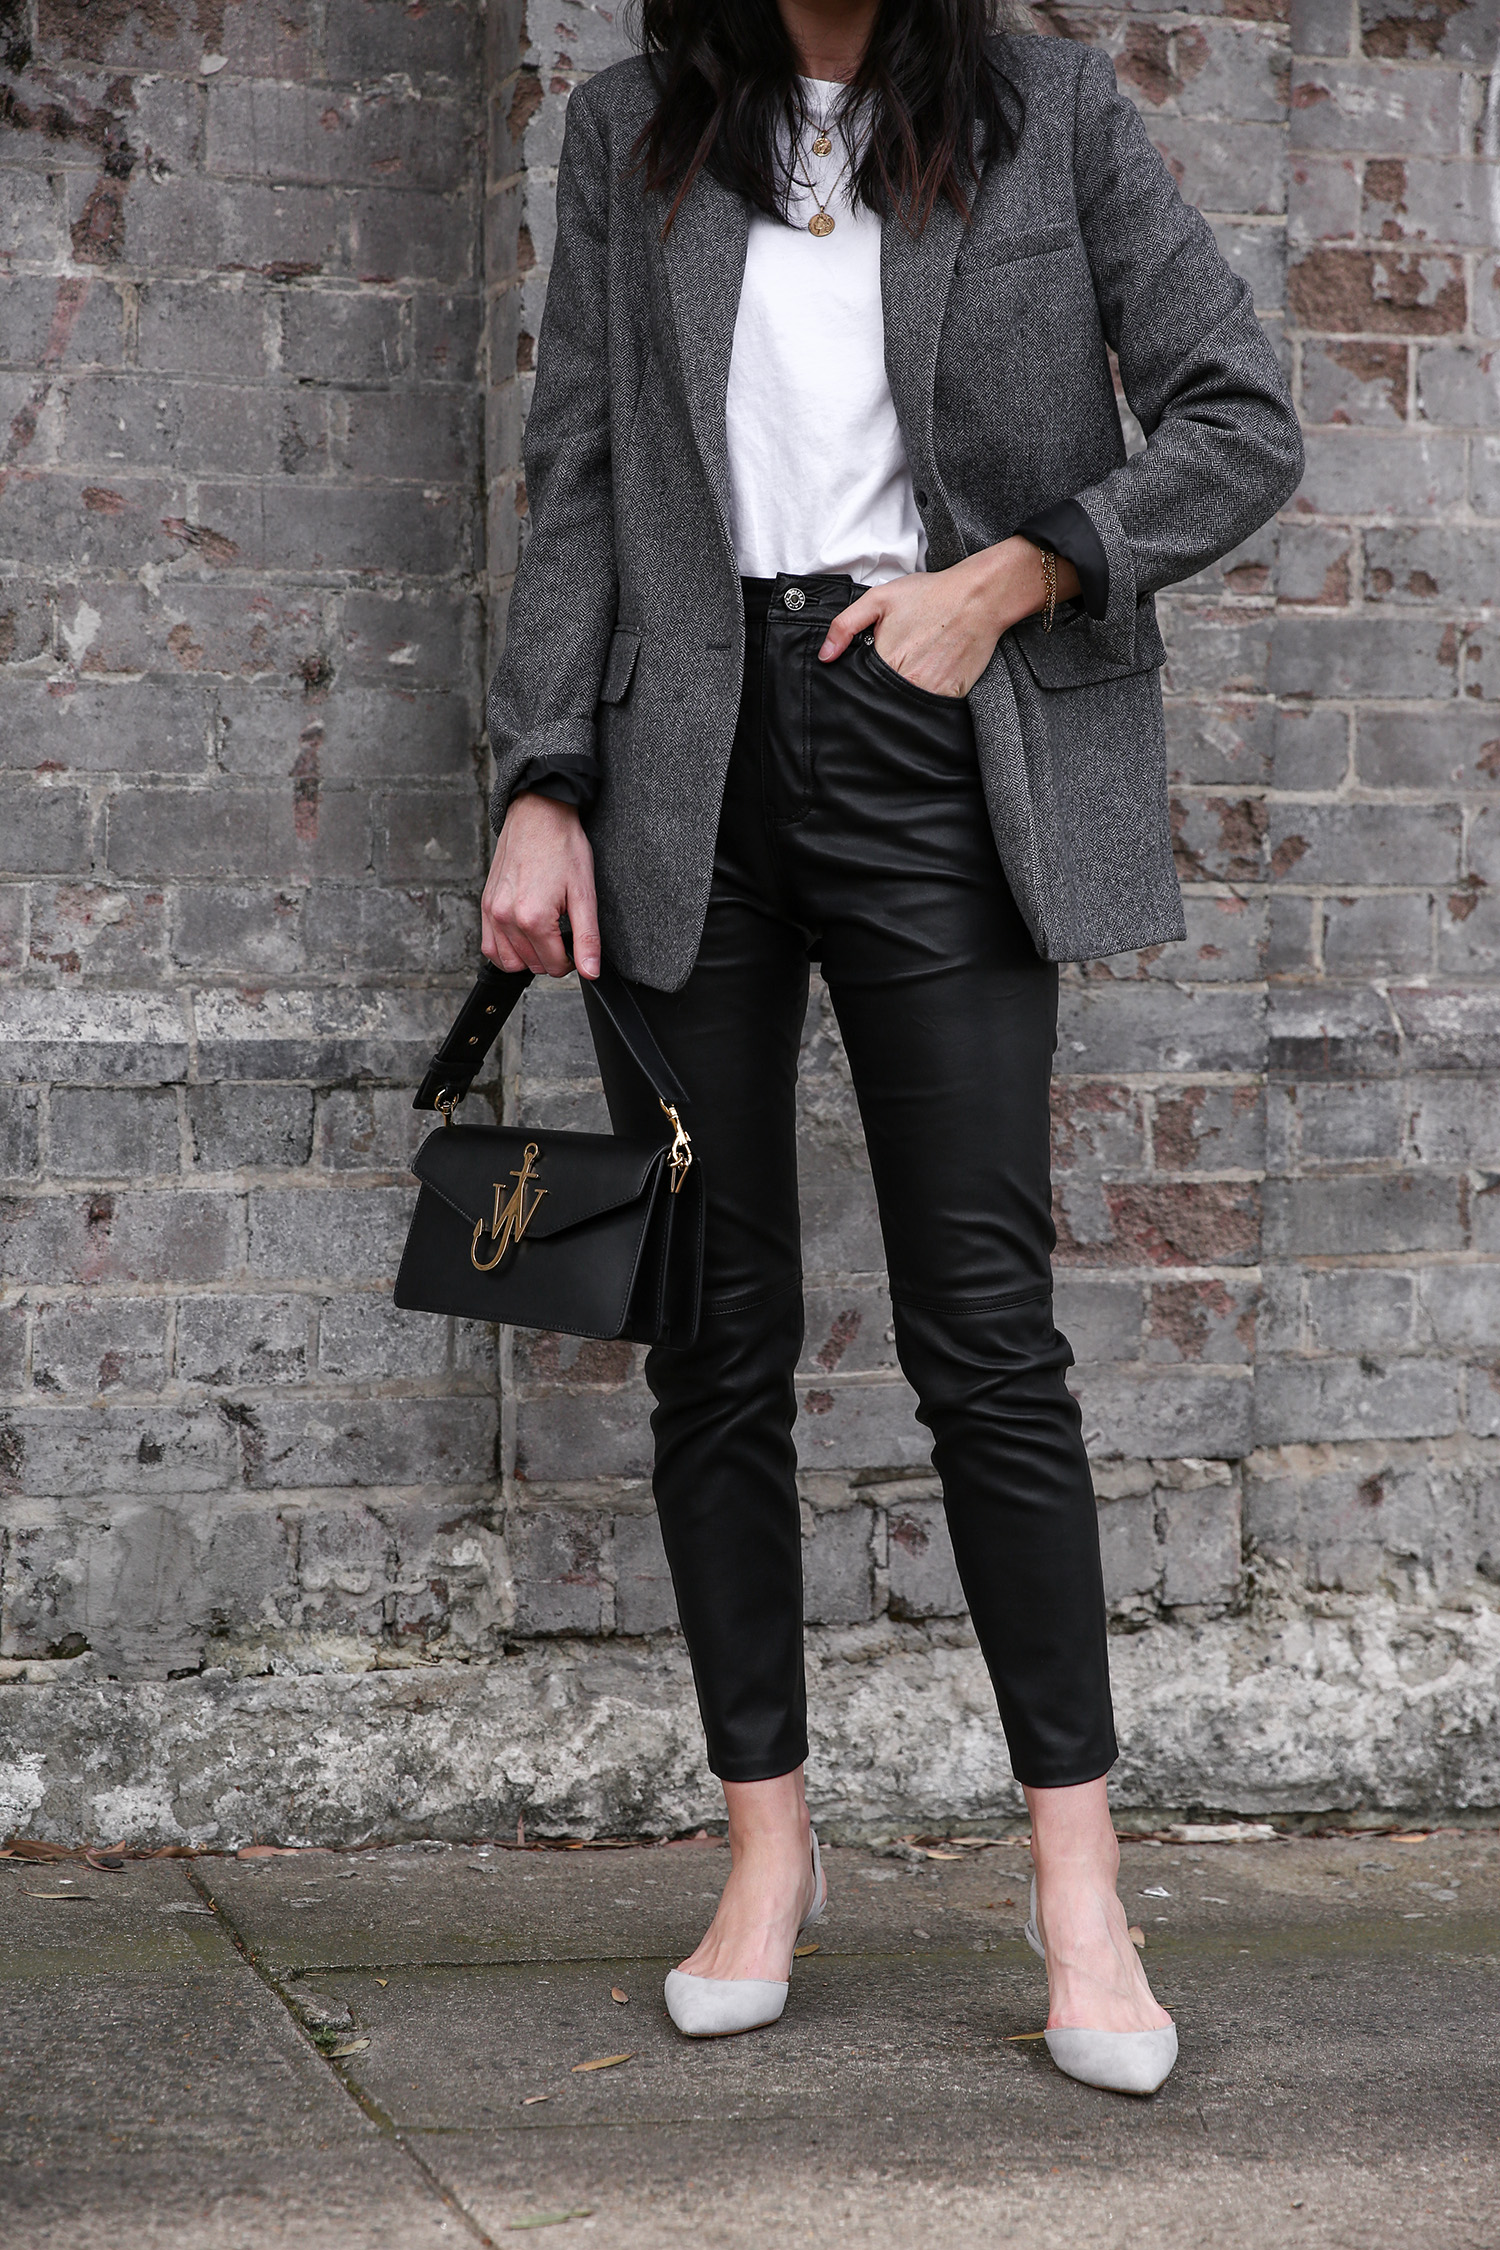 Jamie Lee of Mademoiselle wearing the Everlane oversized blazer and GRLFRND Denim leather trousers